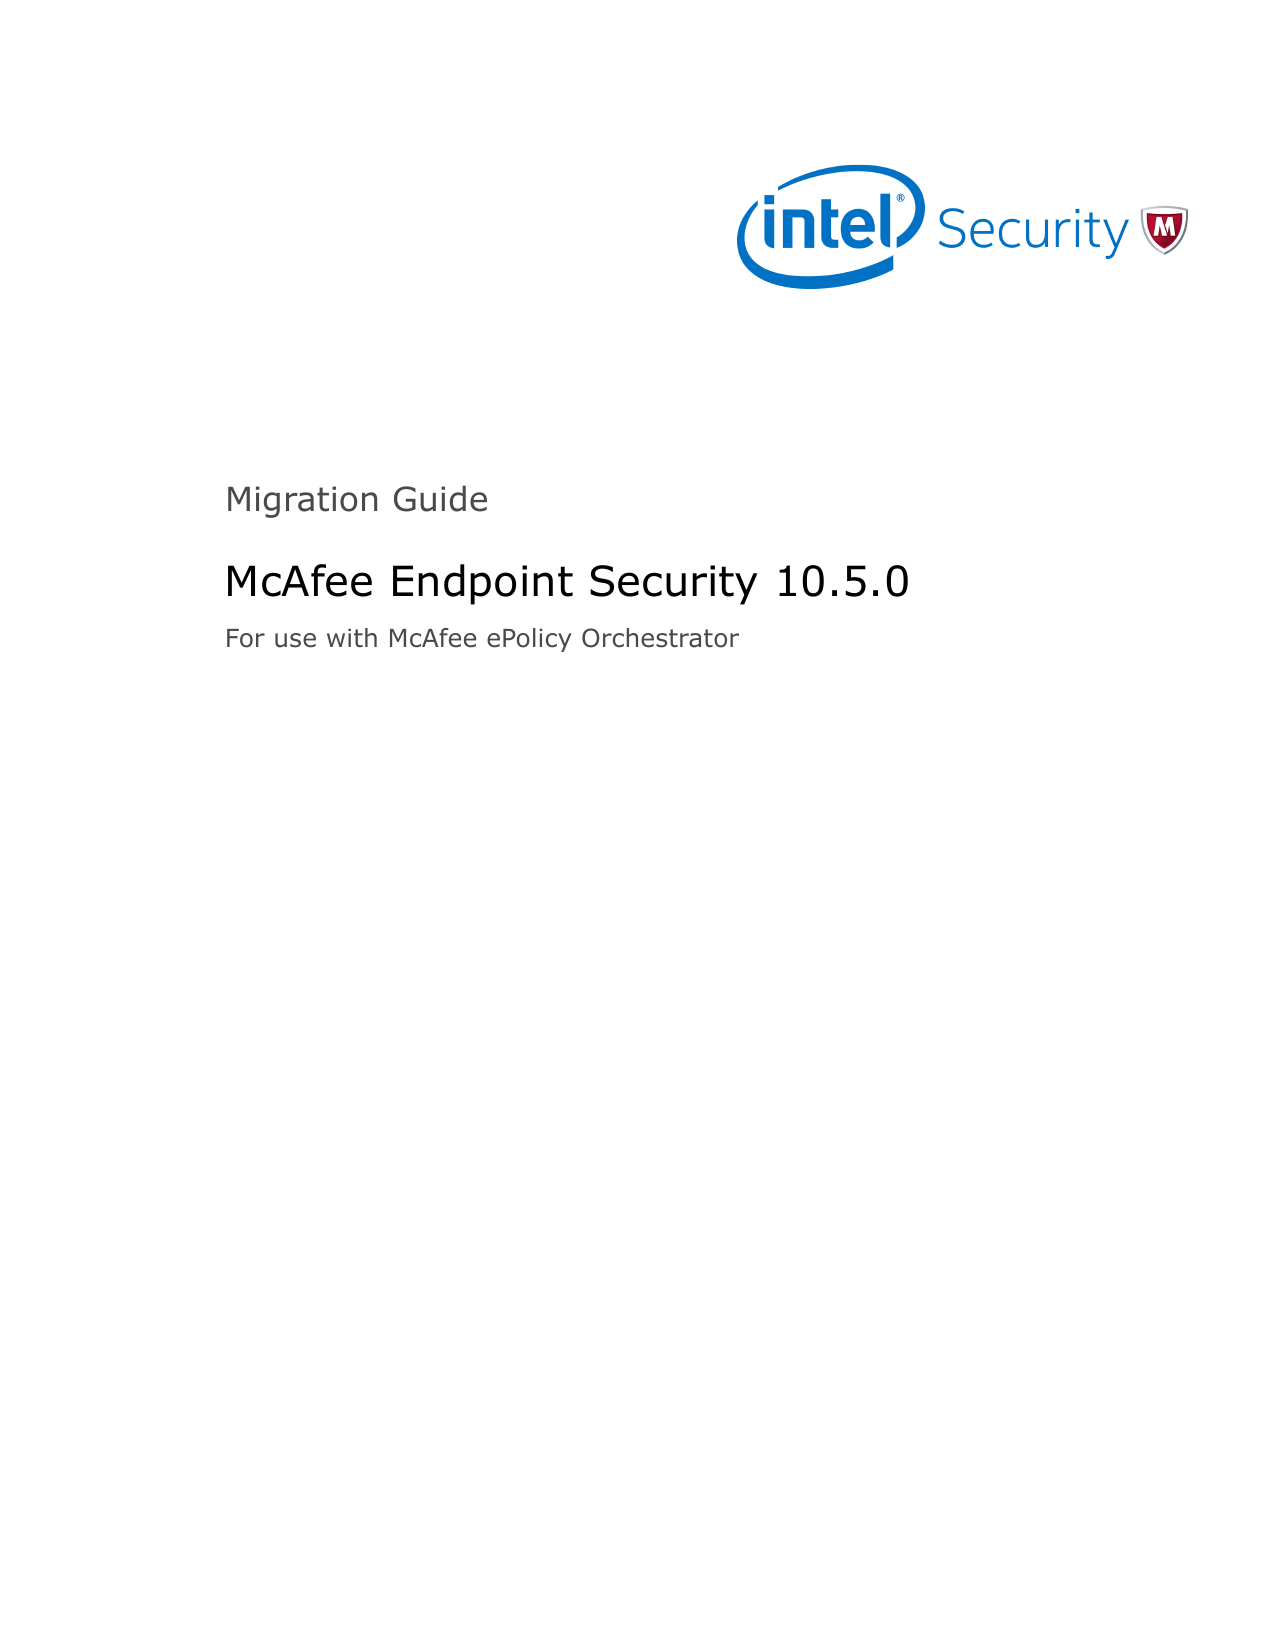 mcafee endpoint security linux service name